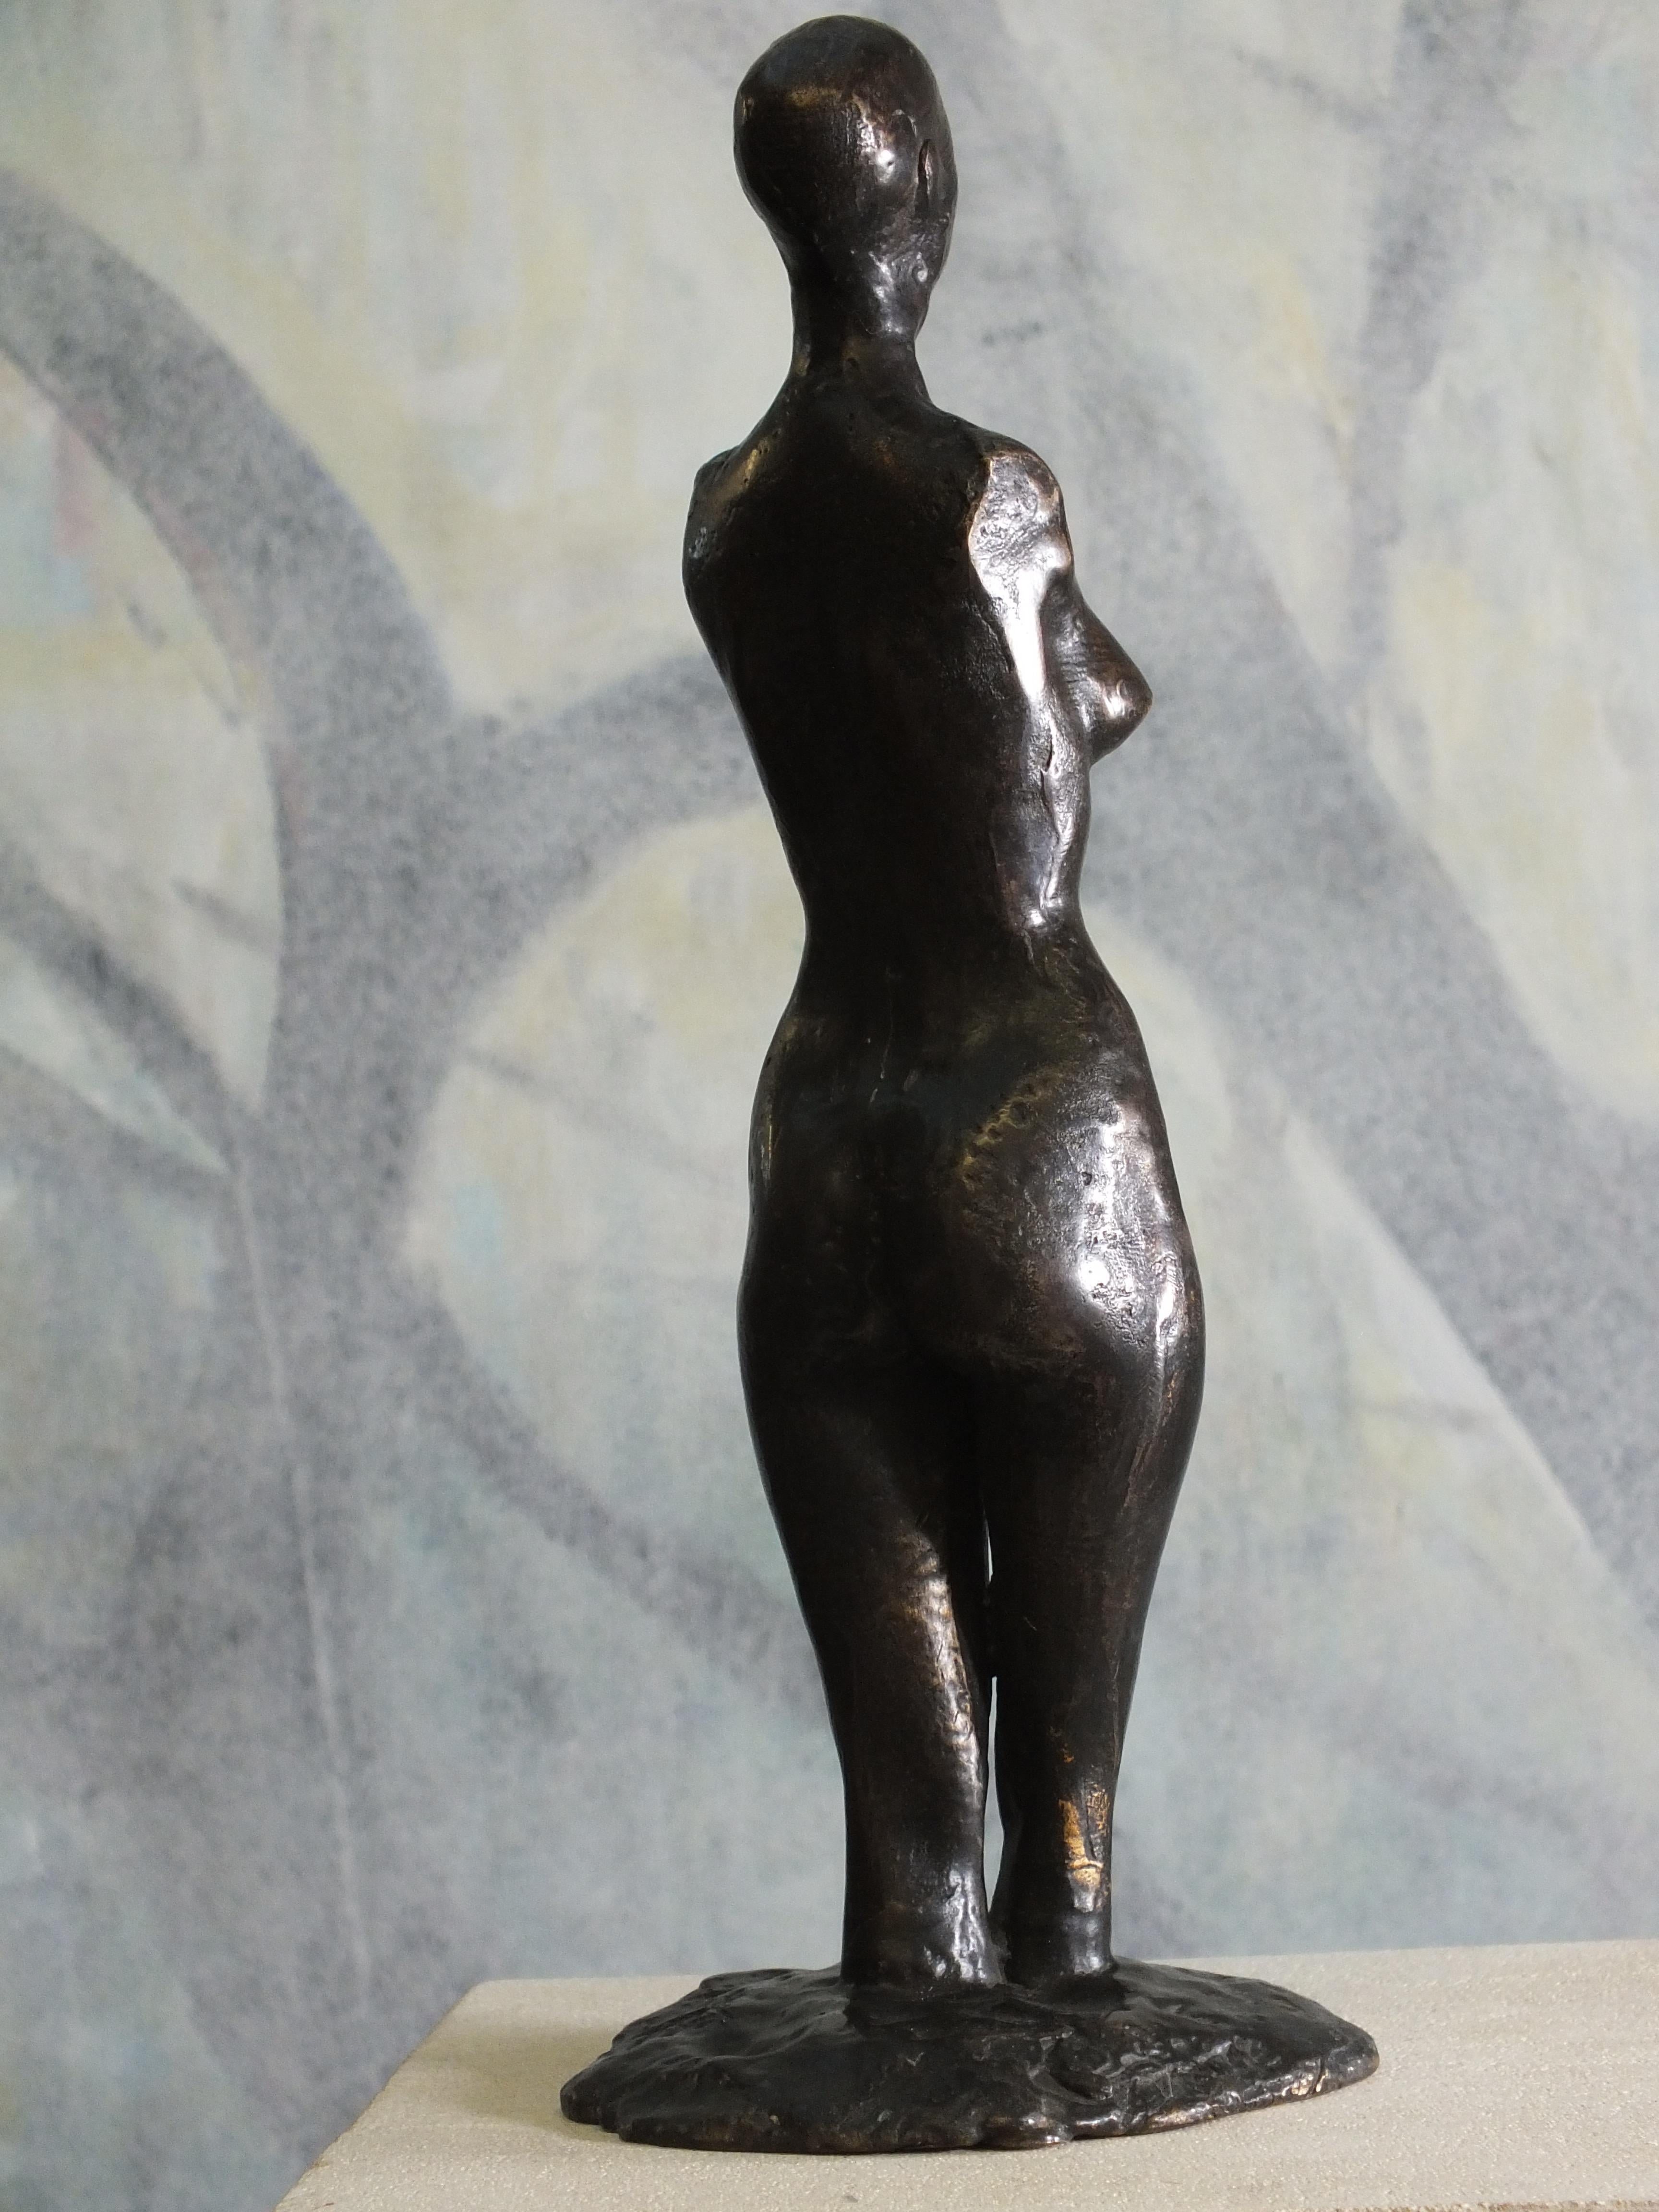 
From the Naiad Series

Tim was born in Derbyshire, England & from an early age was attuned to the natural world. He came to art later in life and forges his sculptures using mainly the lost wax technique. His materials are bronze, steel &